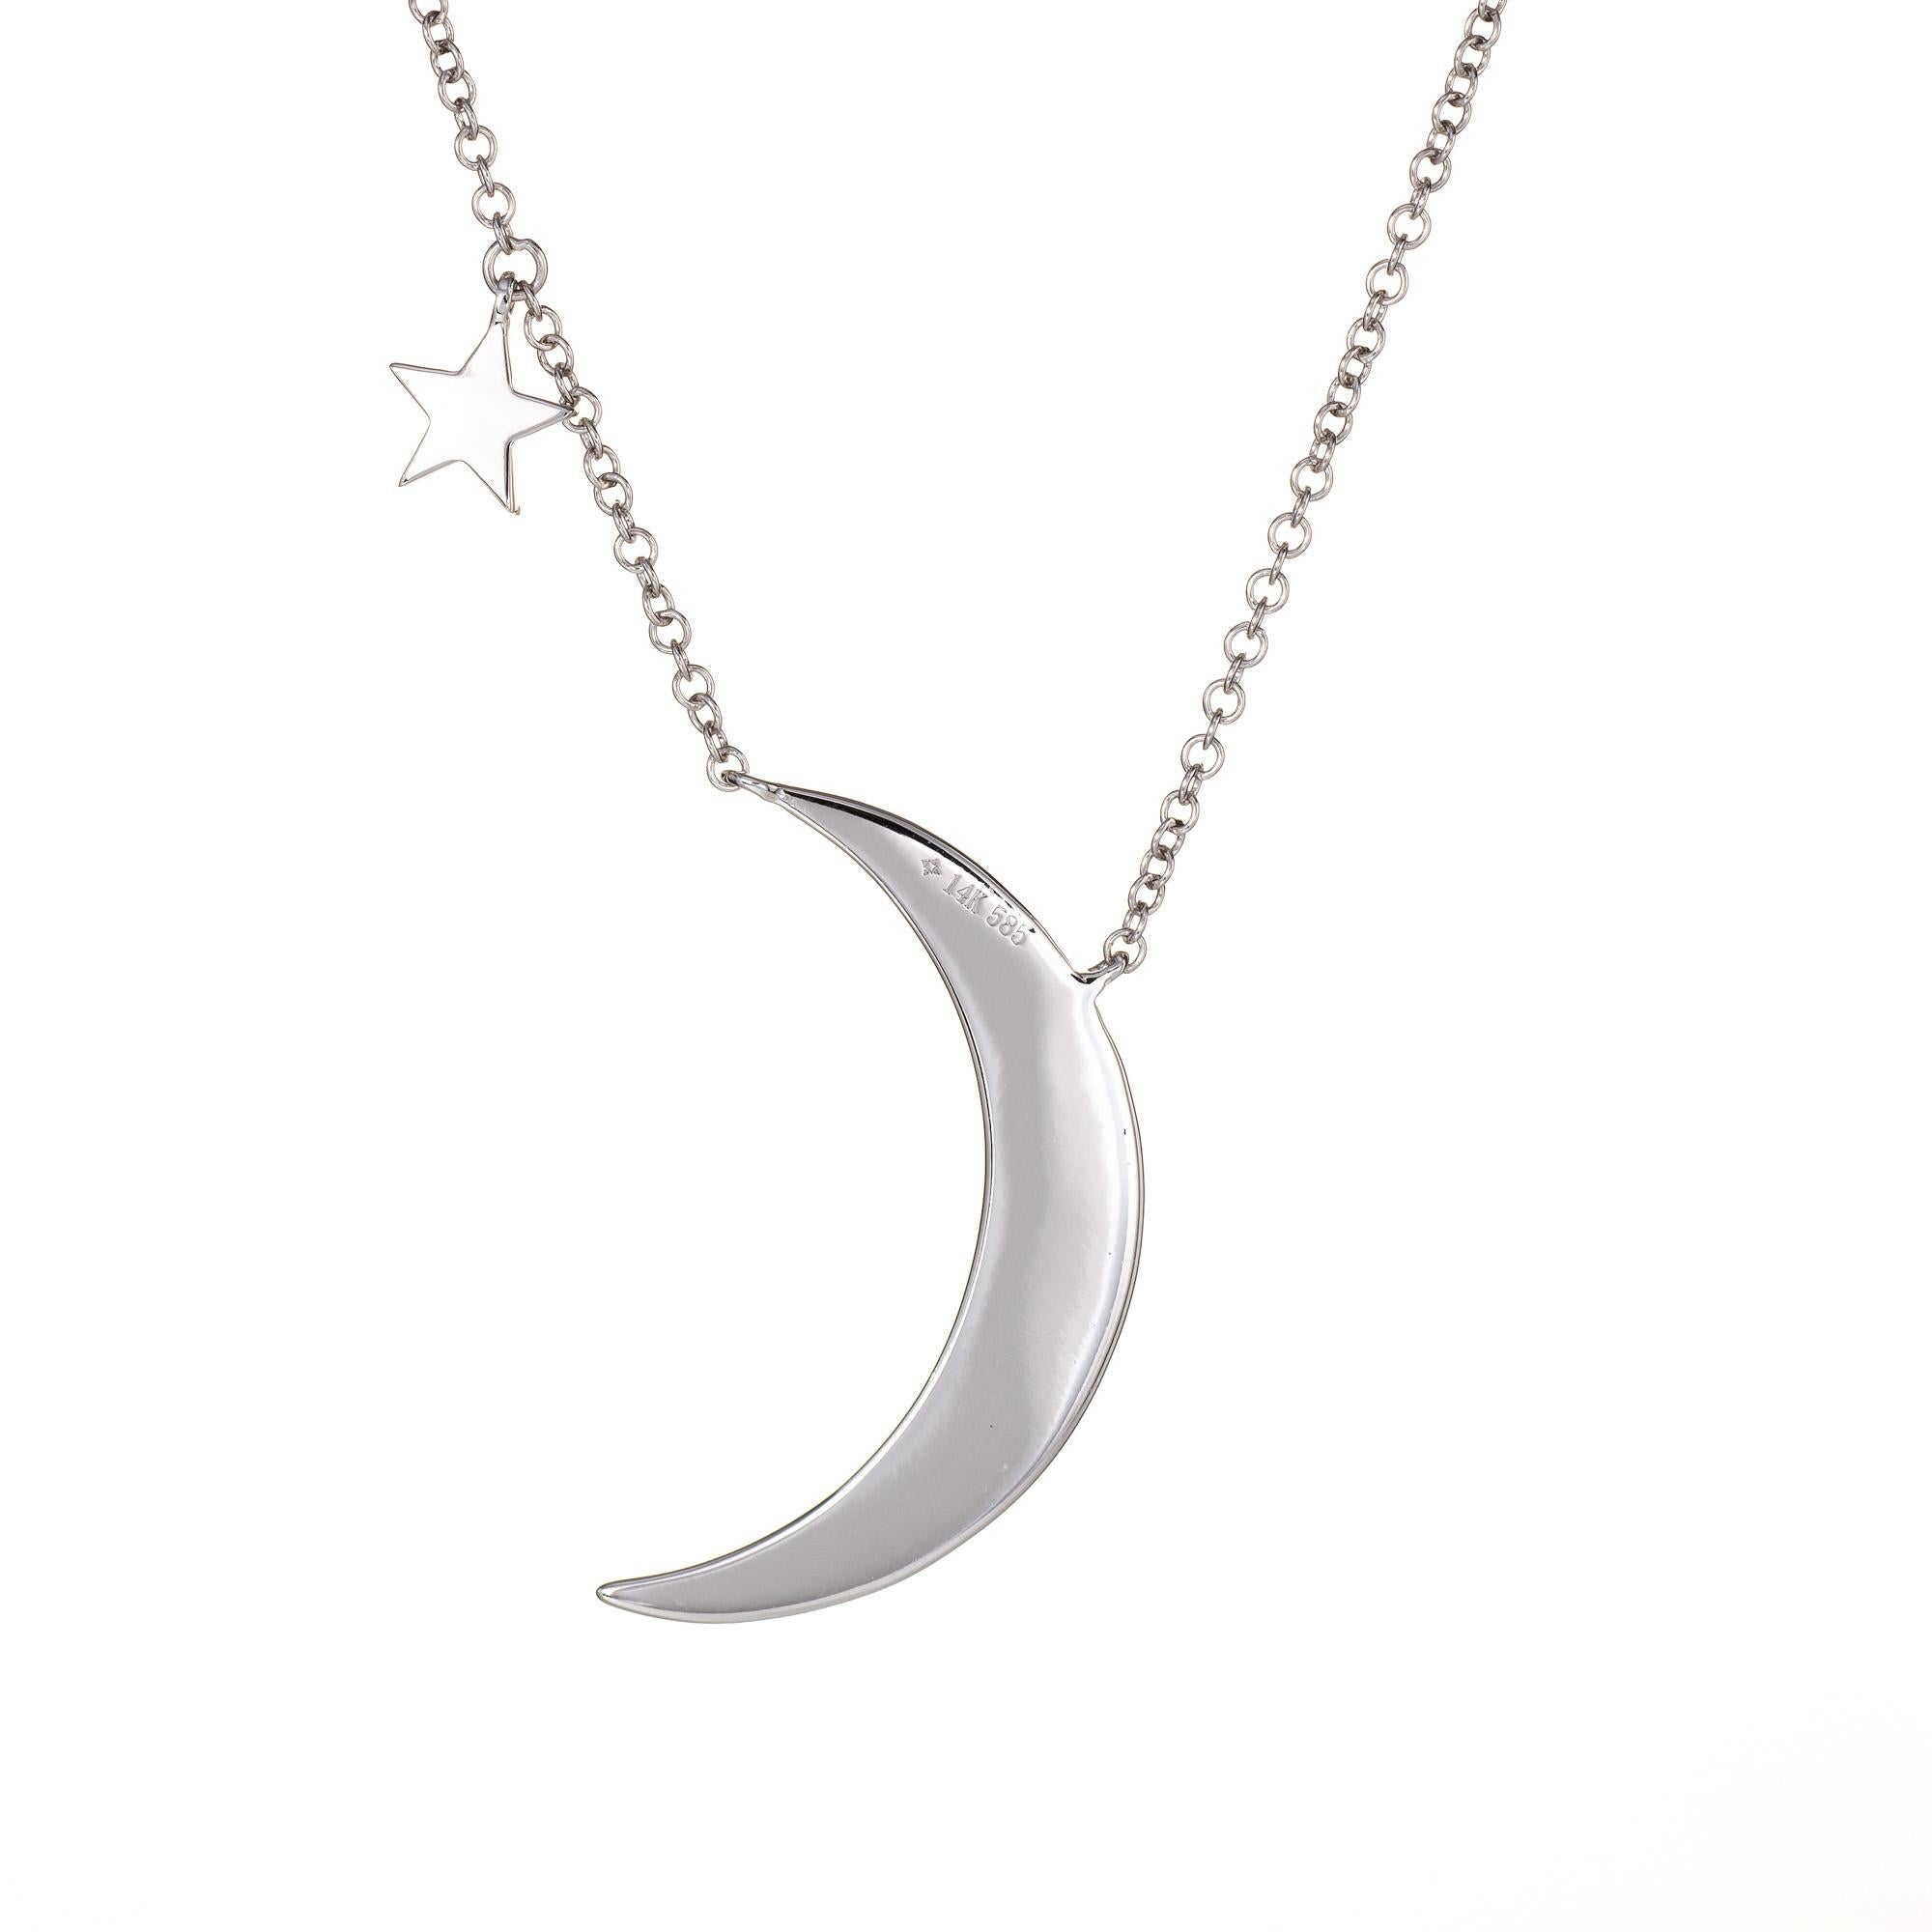 Stylish and finely detailed diamond crescent moon & star necklace crafted in 14 karat white gold.  

Diamonds total an estimated 0.45 carats (estimated at G-H color and VS2-SI2 clarity). 

The pendant features diamonds finely pave set into the